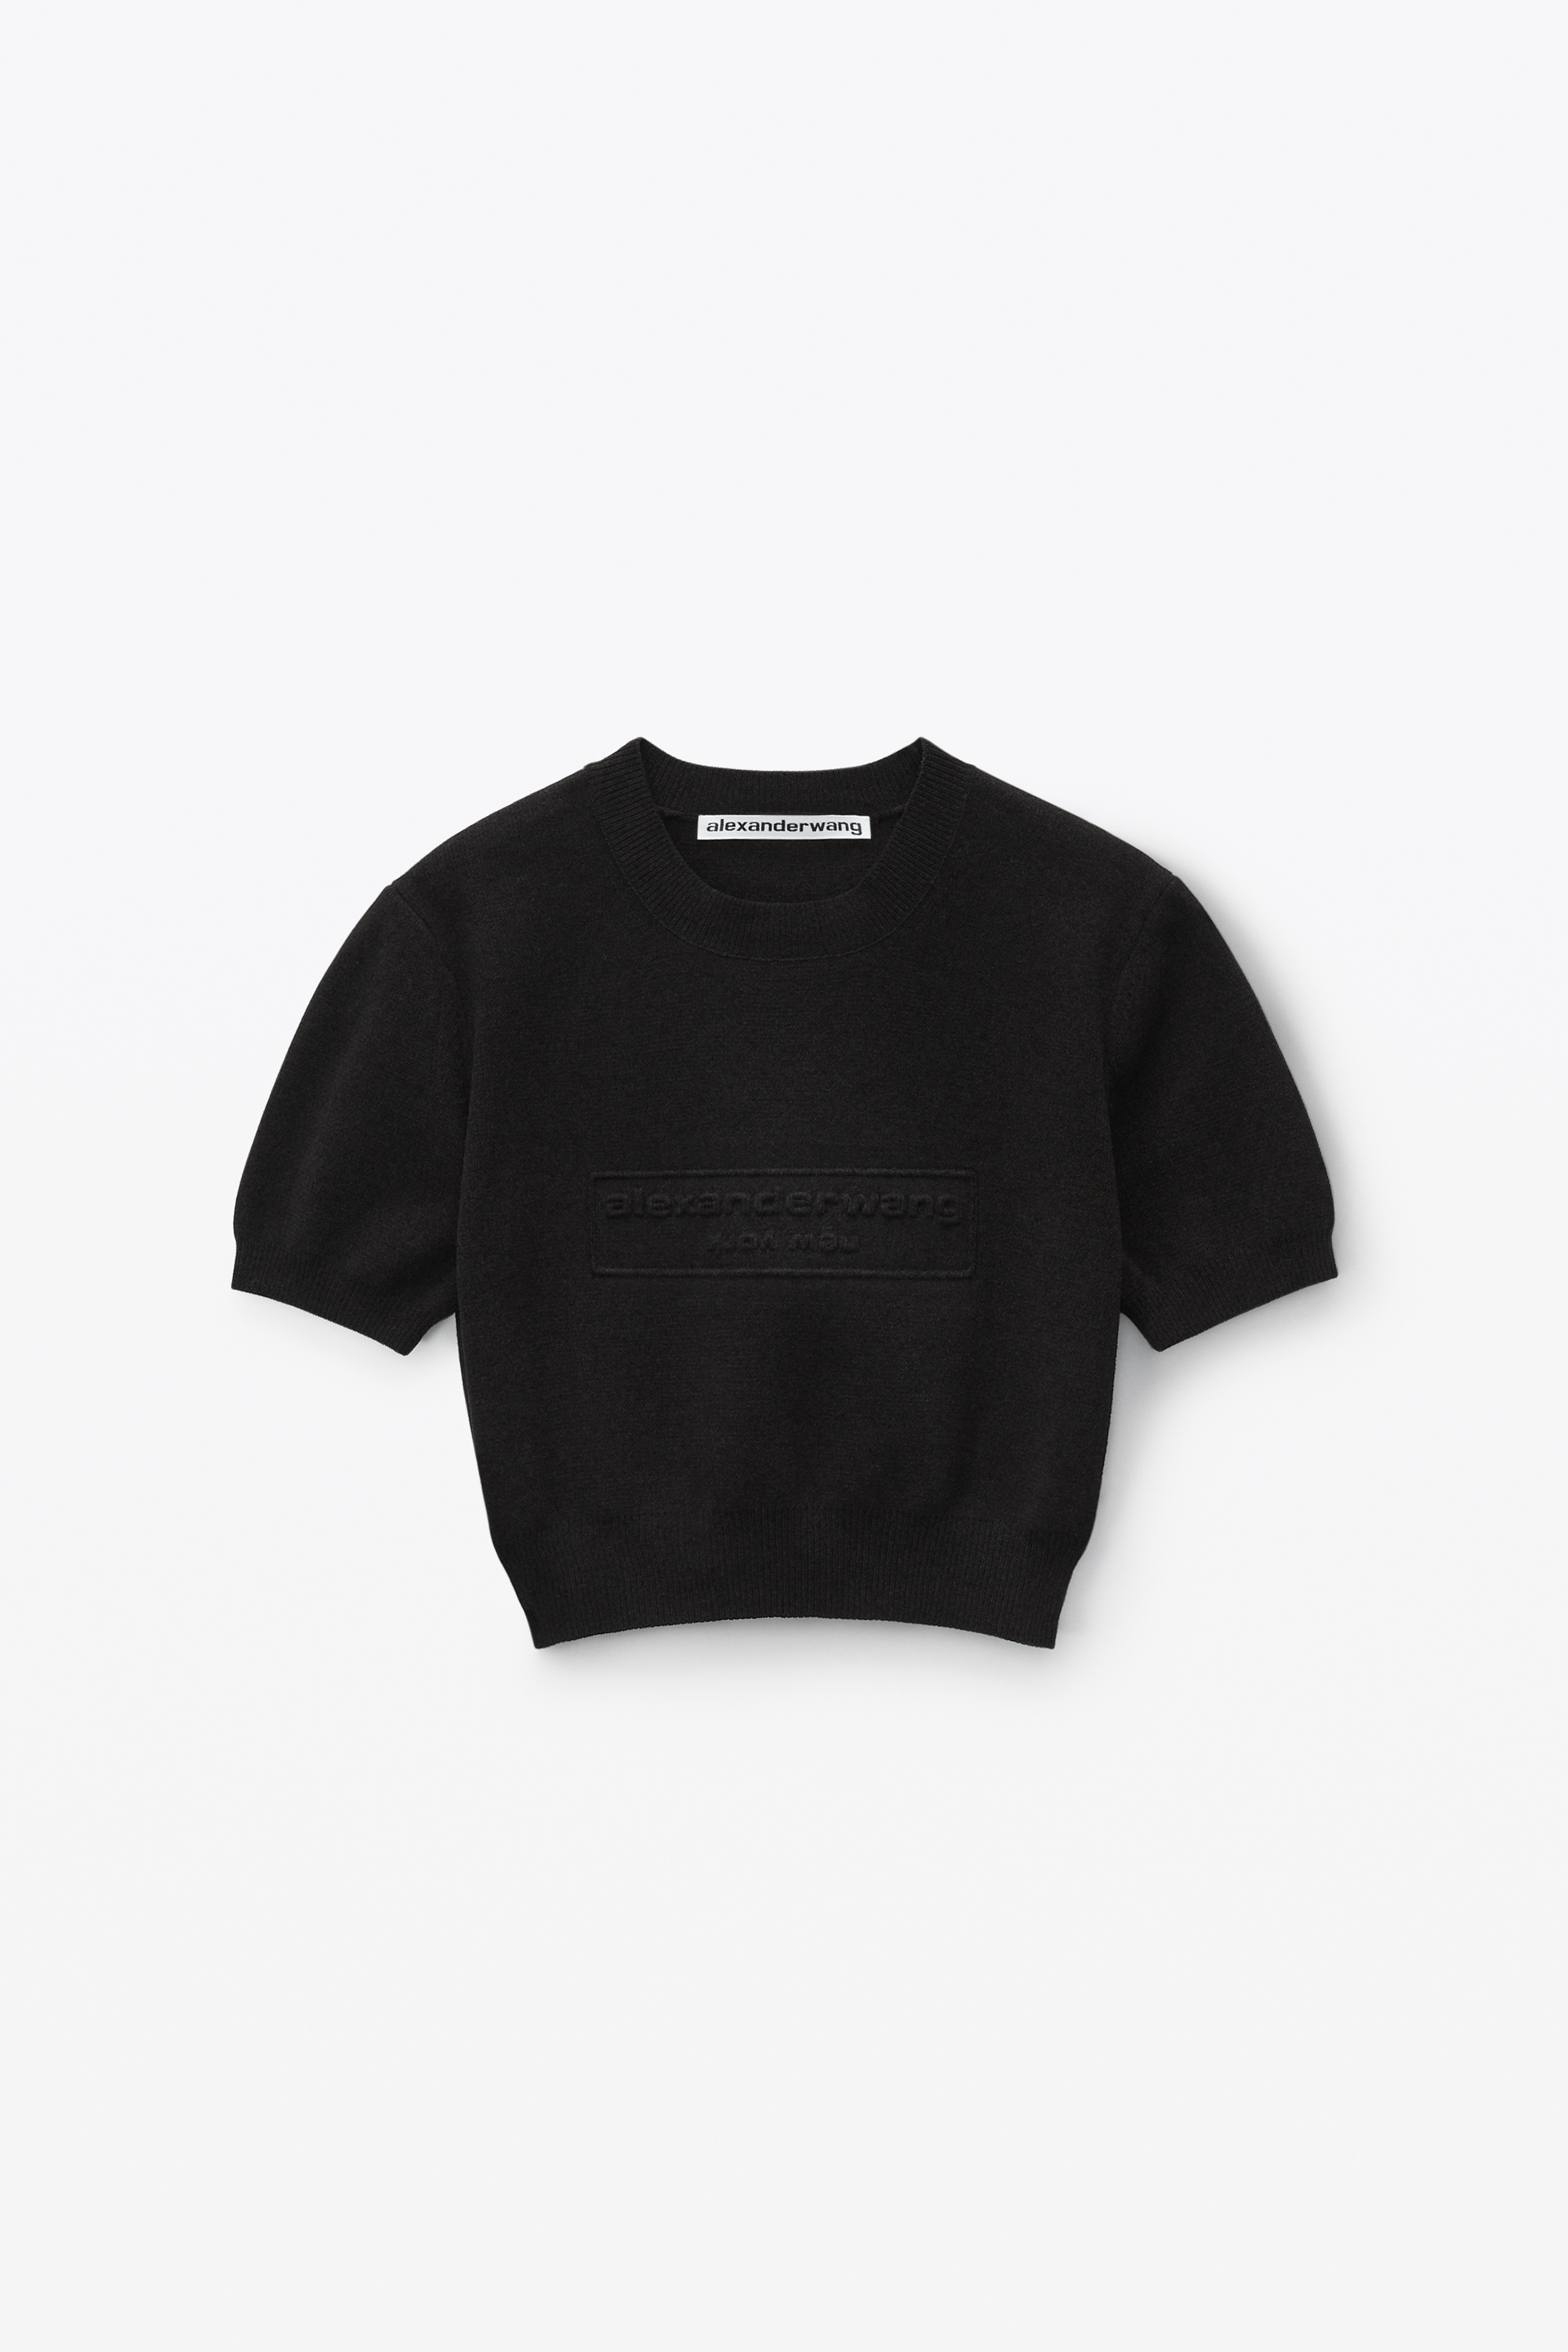 Alexander Wang SWEATER TEE IN RIBBED CHENILLE